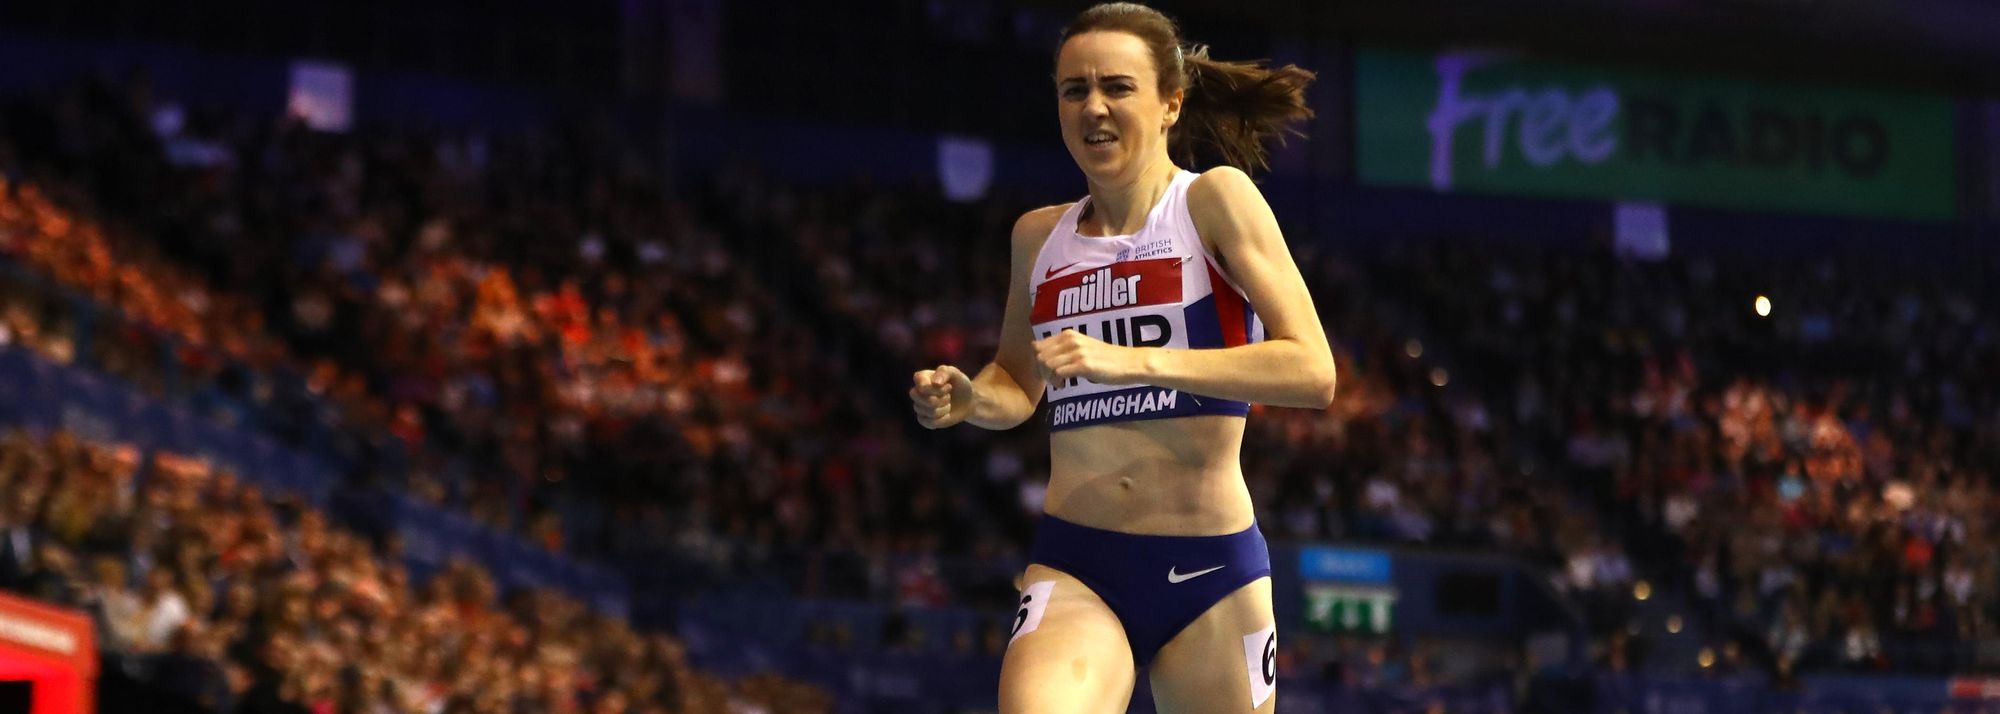 Olympic silver medallist will aim to run faster than 2:30.94